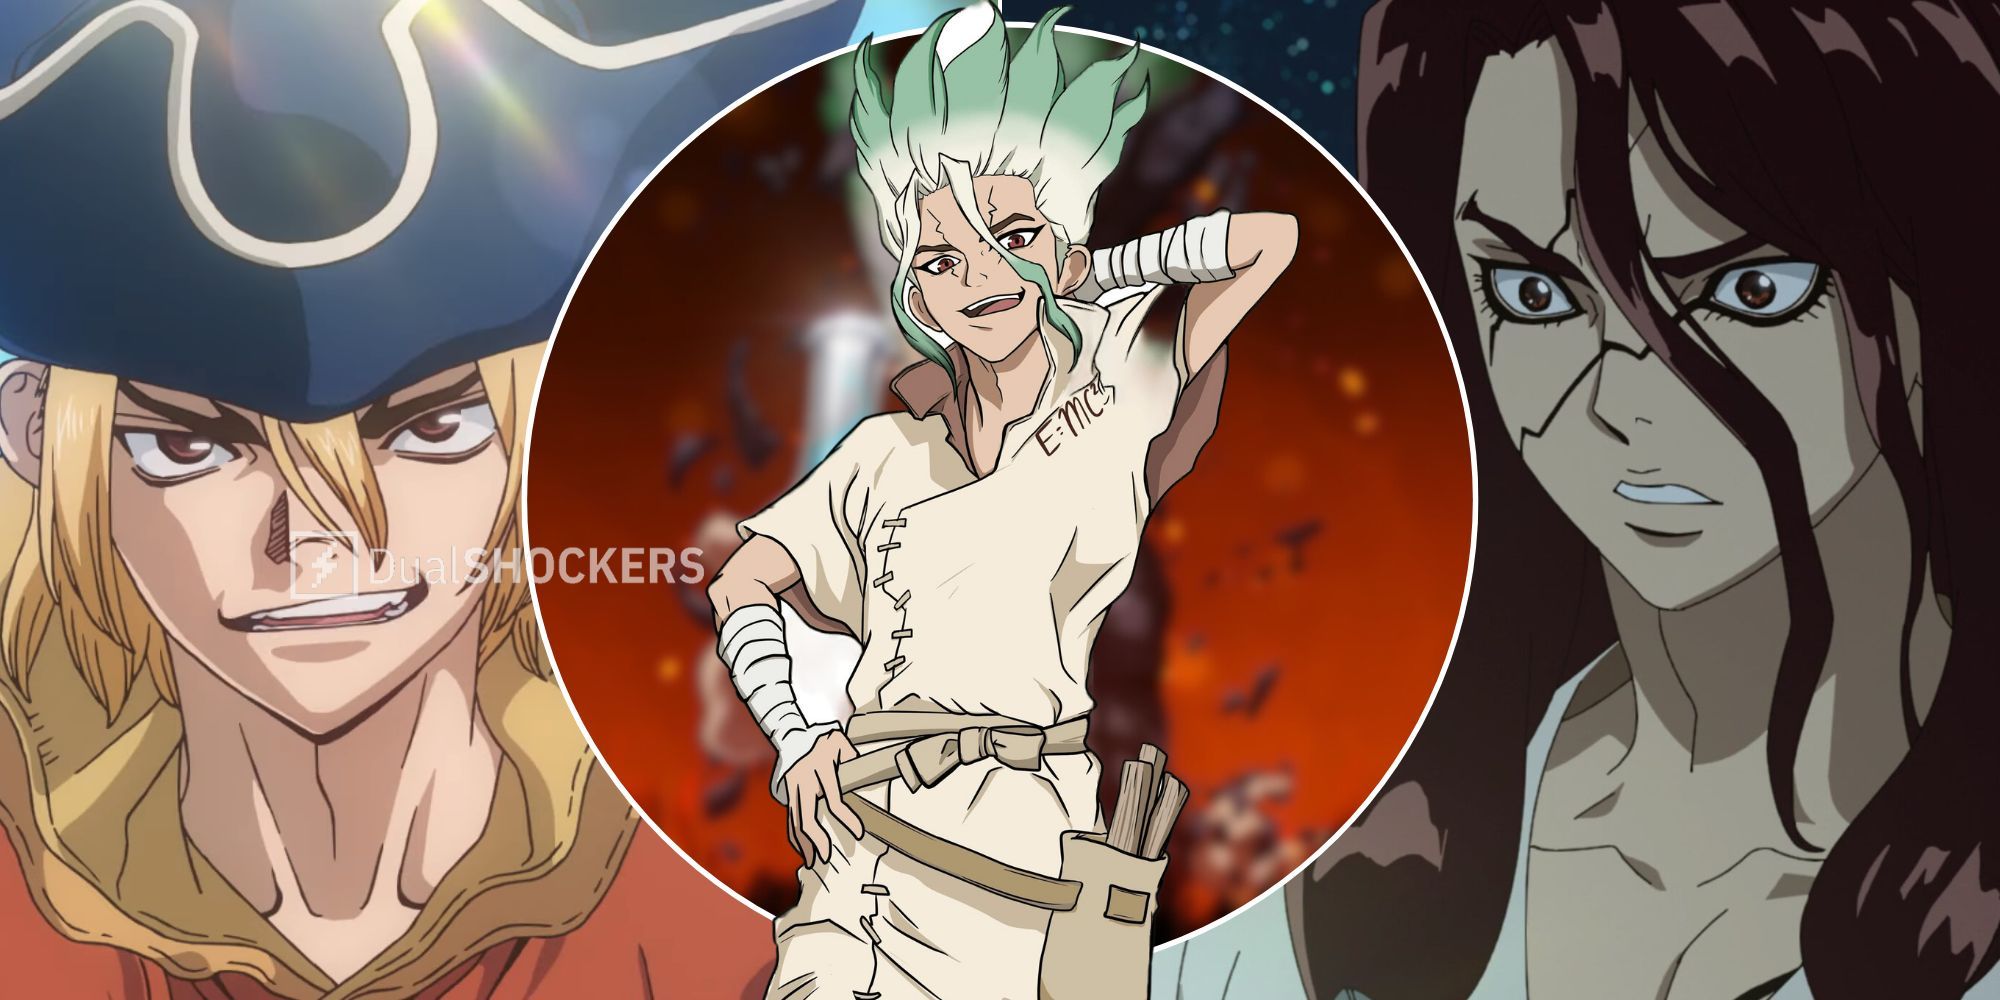 Dr.Stone 2022-2023 Calendar: Dr.Stone Anime-Manga OFFICIAL Calendar  2022-2023 ,Calendar Planner with 18 Exclusive Ten Pictures for Fans Around  the World! : Boyd Marsh: Amazon.sg: Books